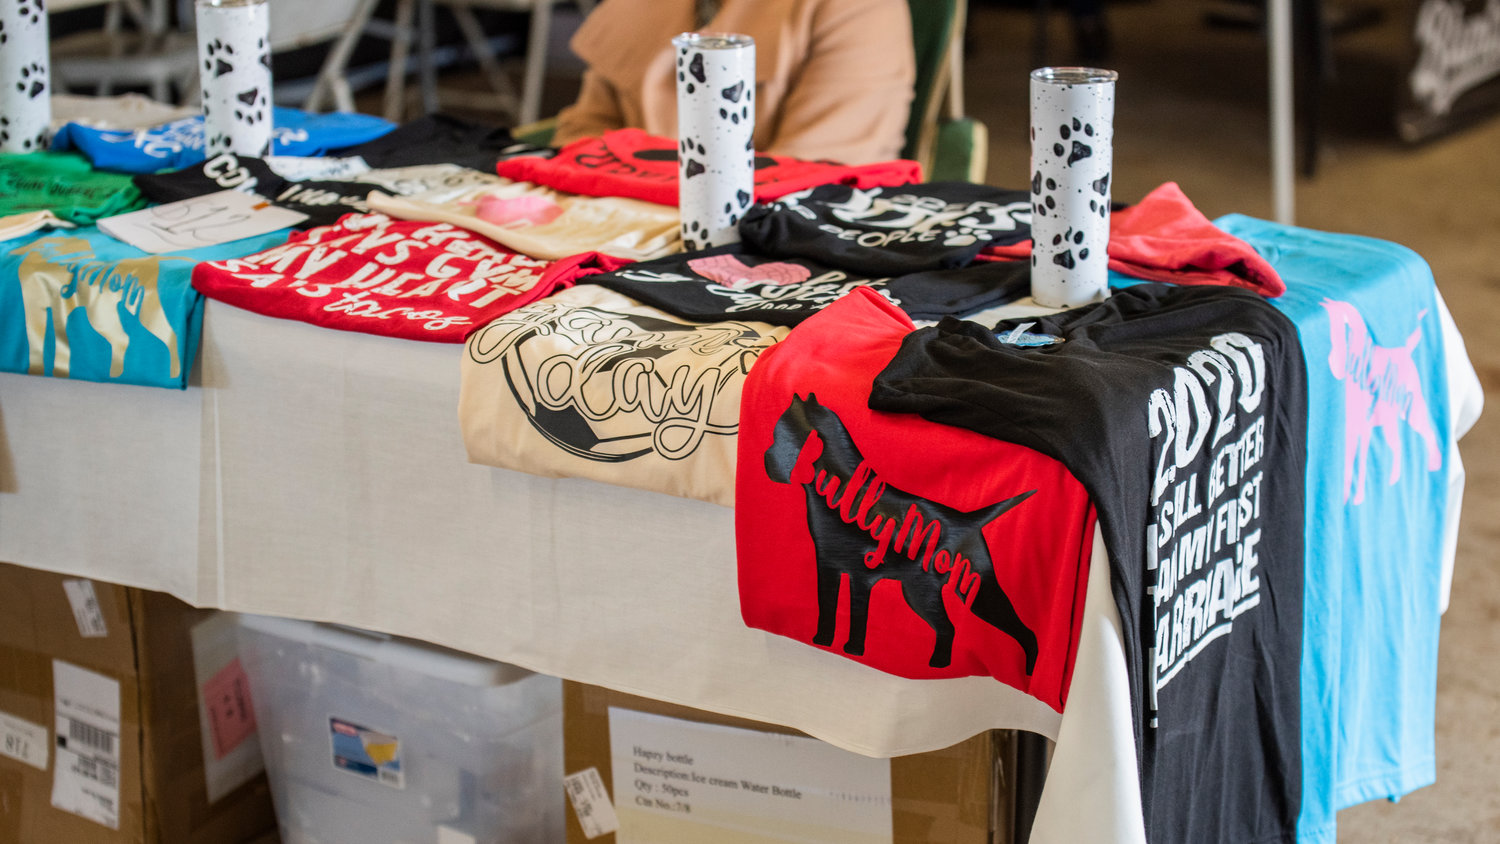 Bully merchandise sits on display at the Southwest Washington Fairgrounds in Centralia Saturday morning.